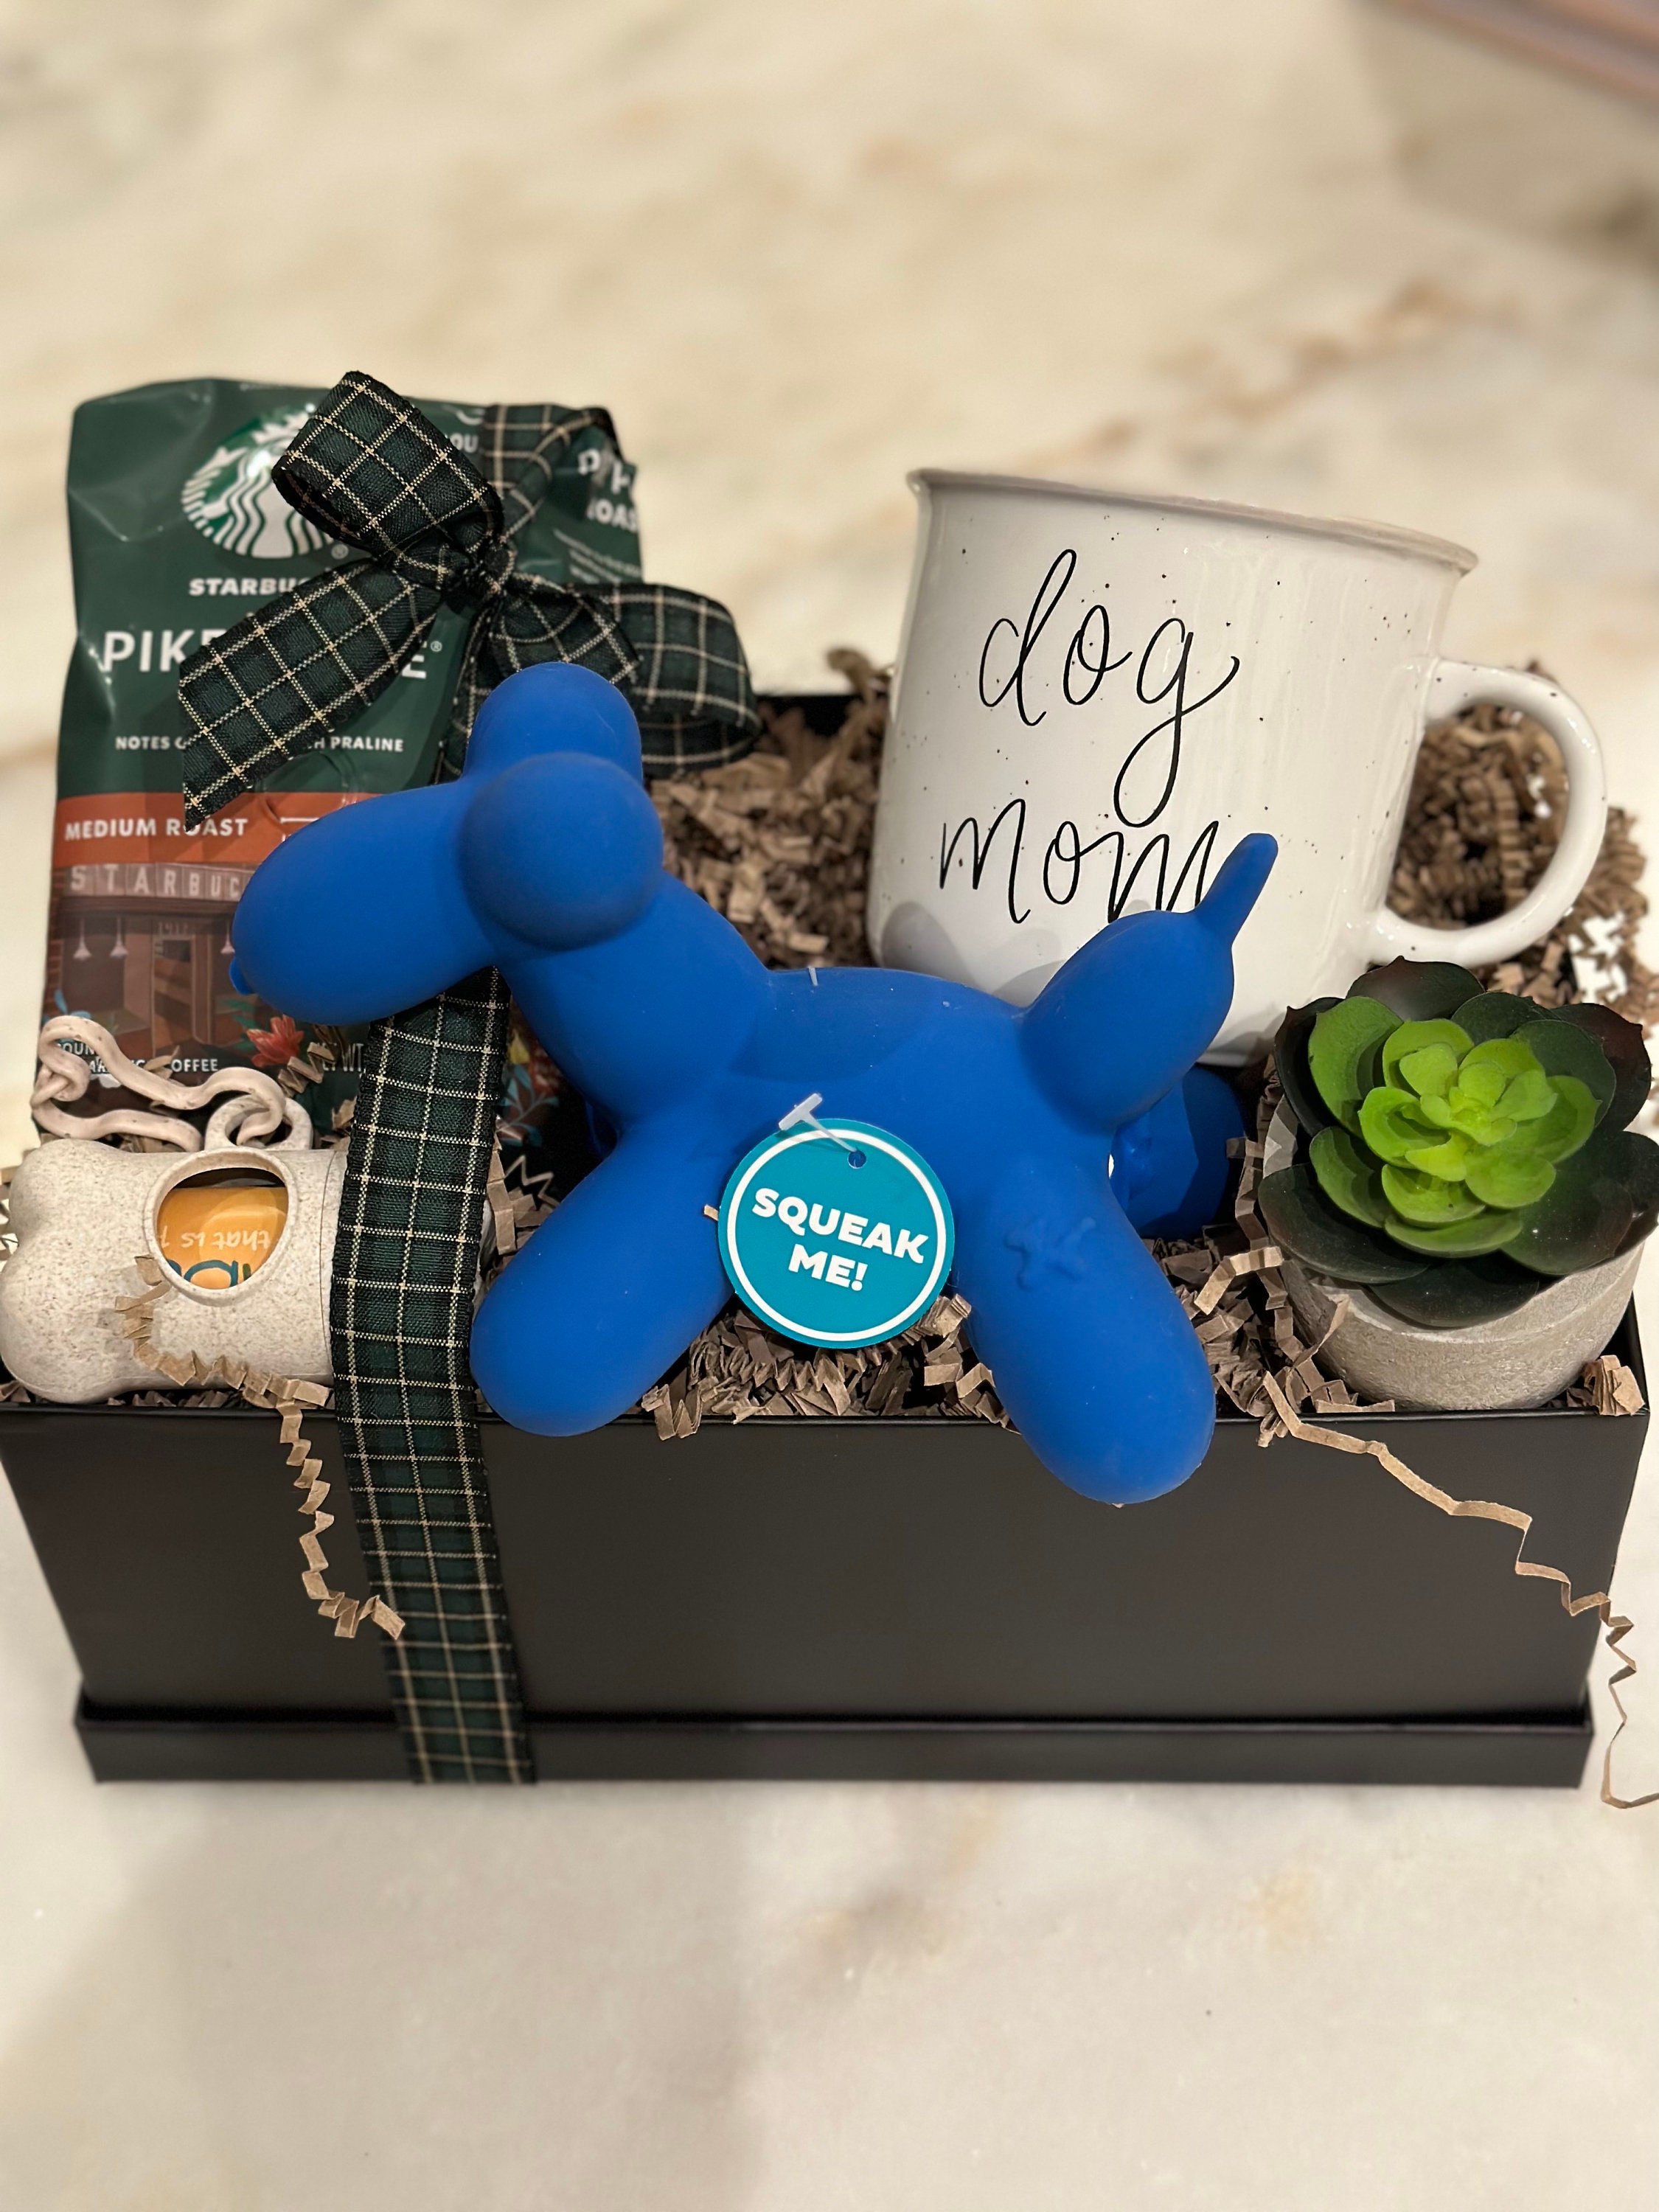 Mother's Day Gifts for Dog Lovers: Celebrate Mom With Items She'll Love